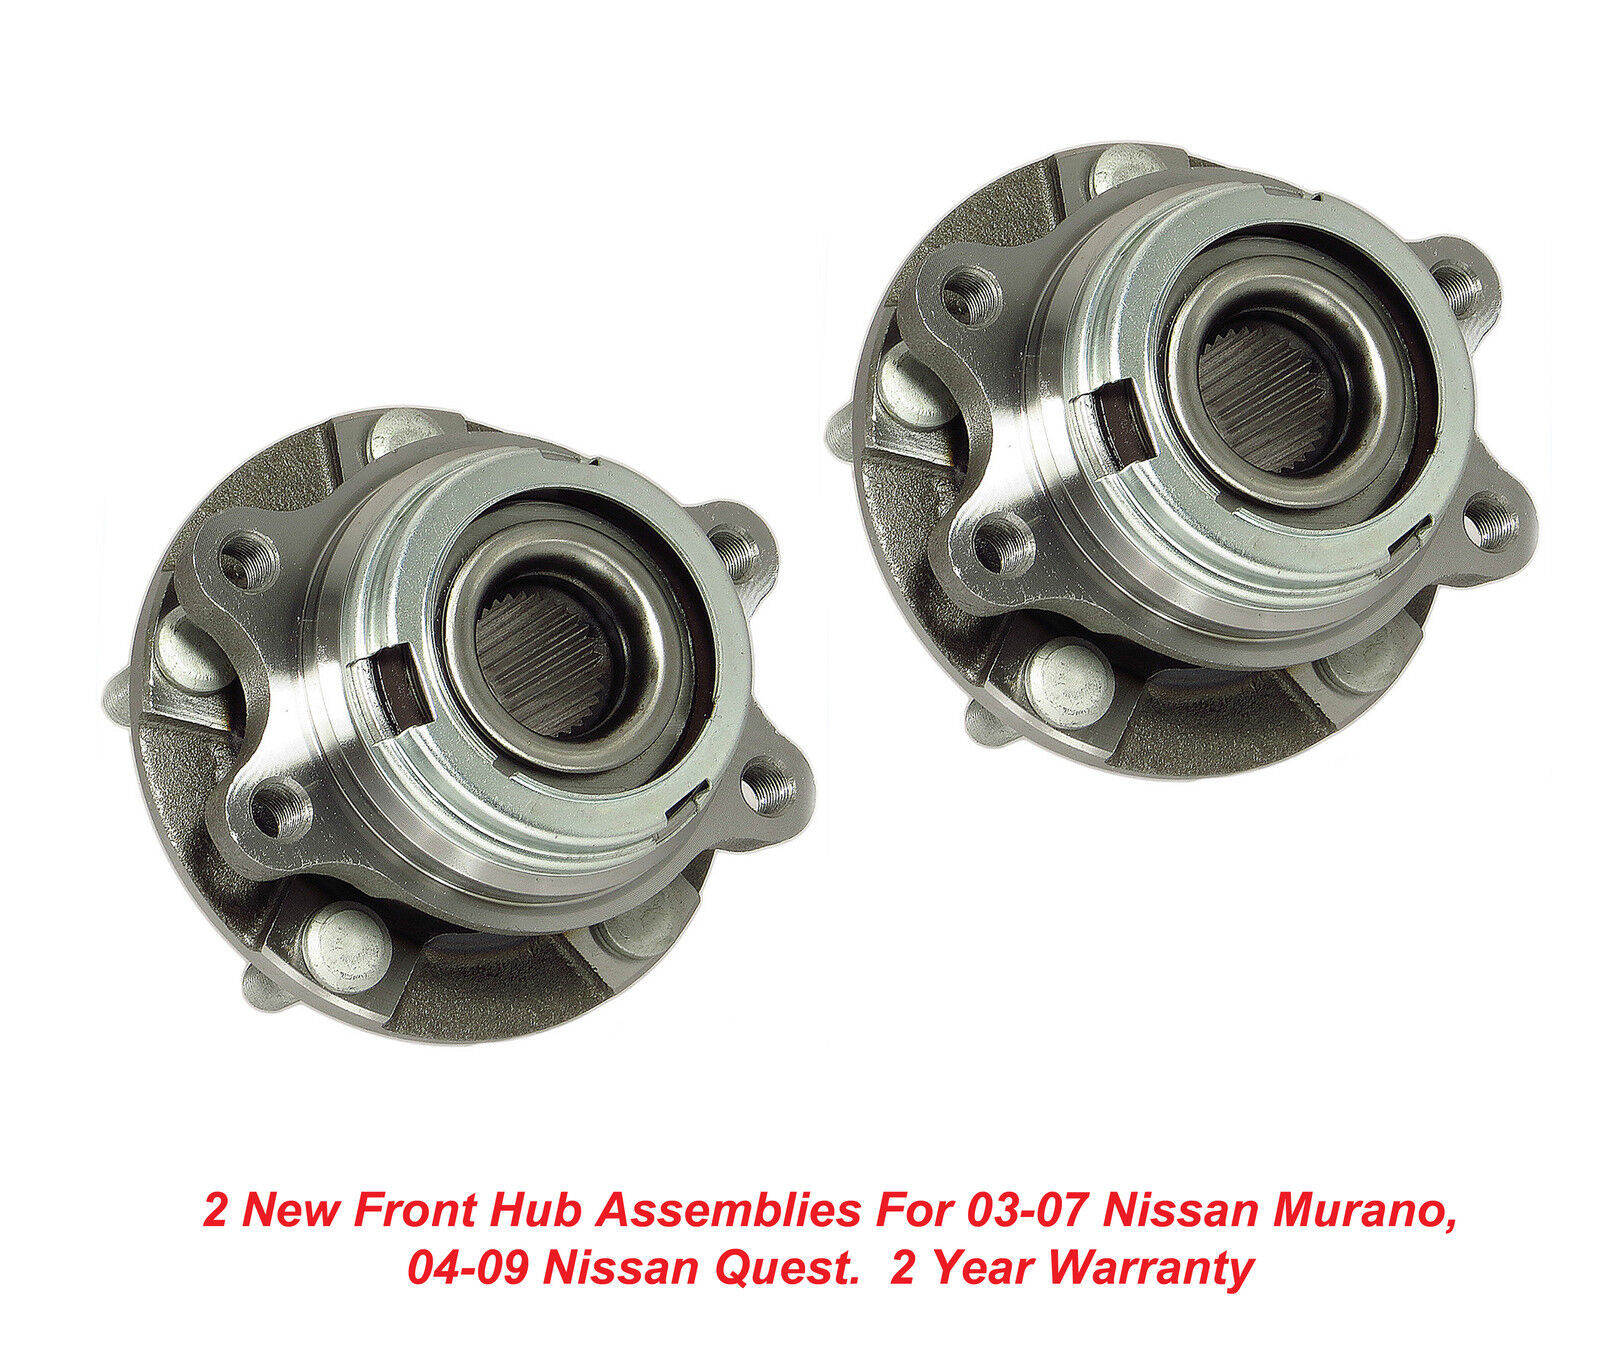 2 New DTA Wheel Hub Bearings Front Left & Right Fits Nissan Quest Murano